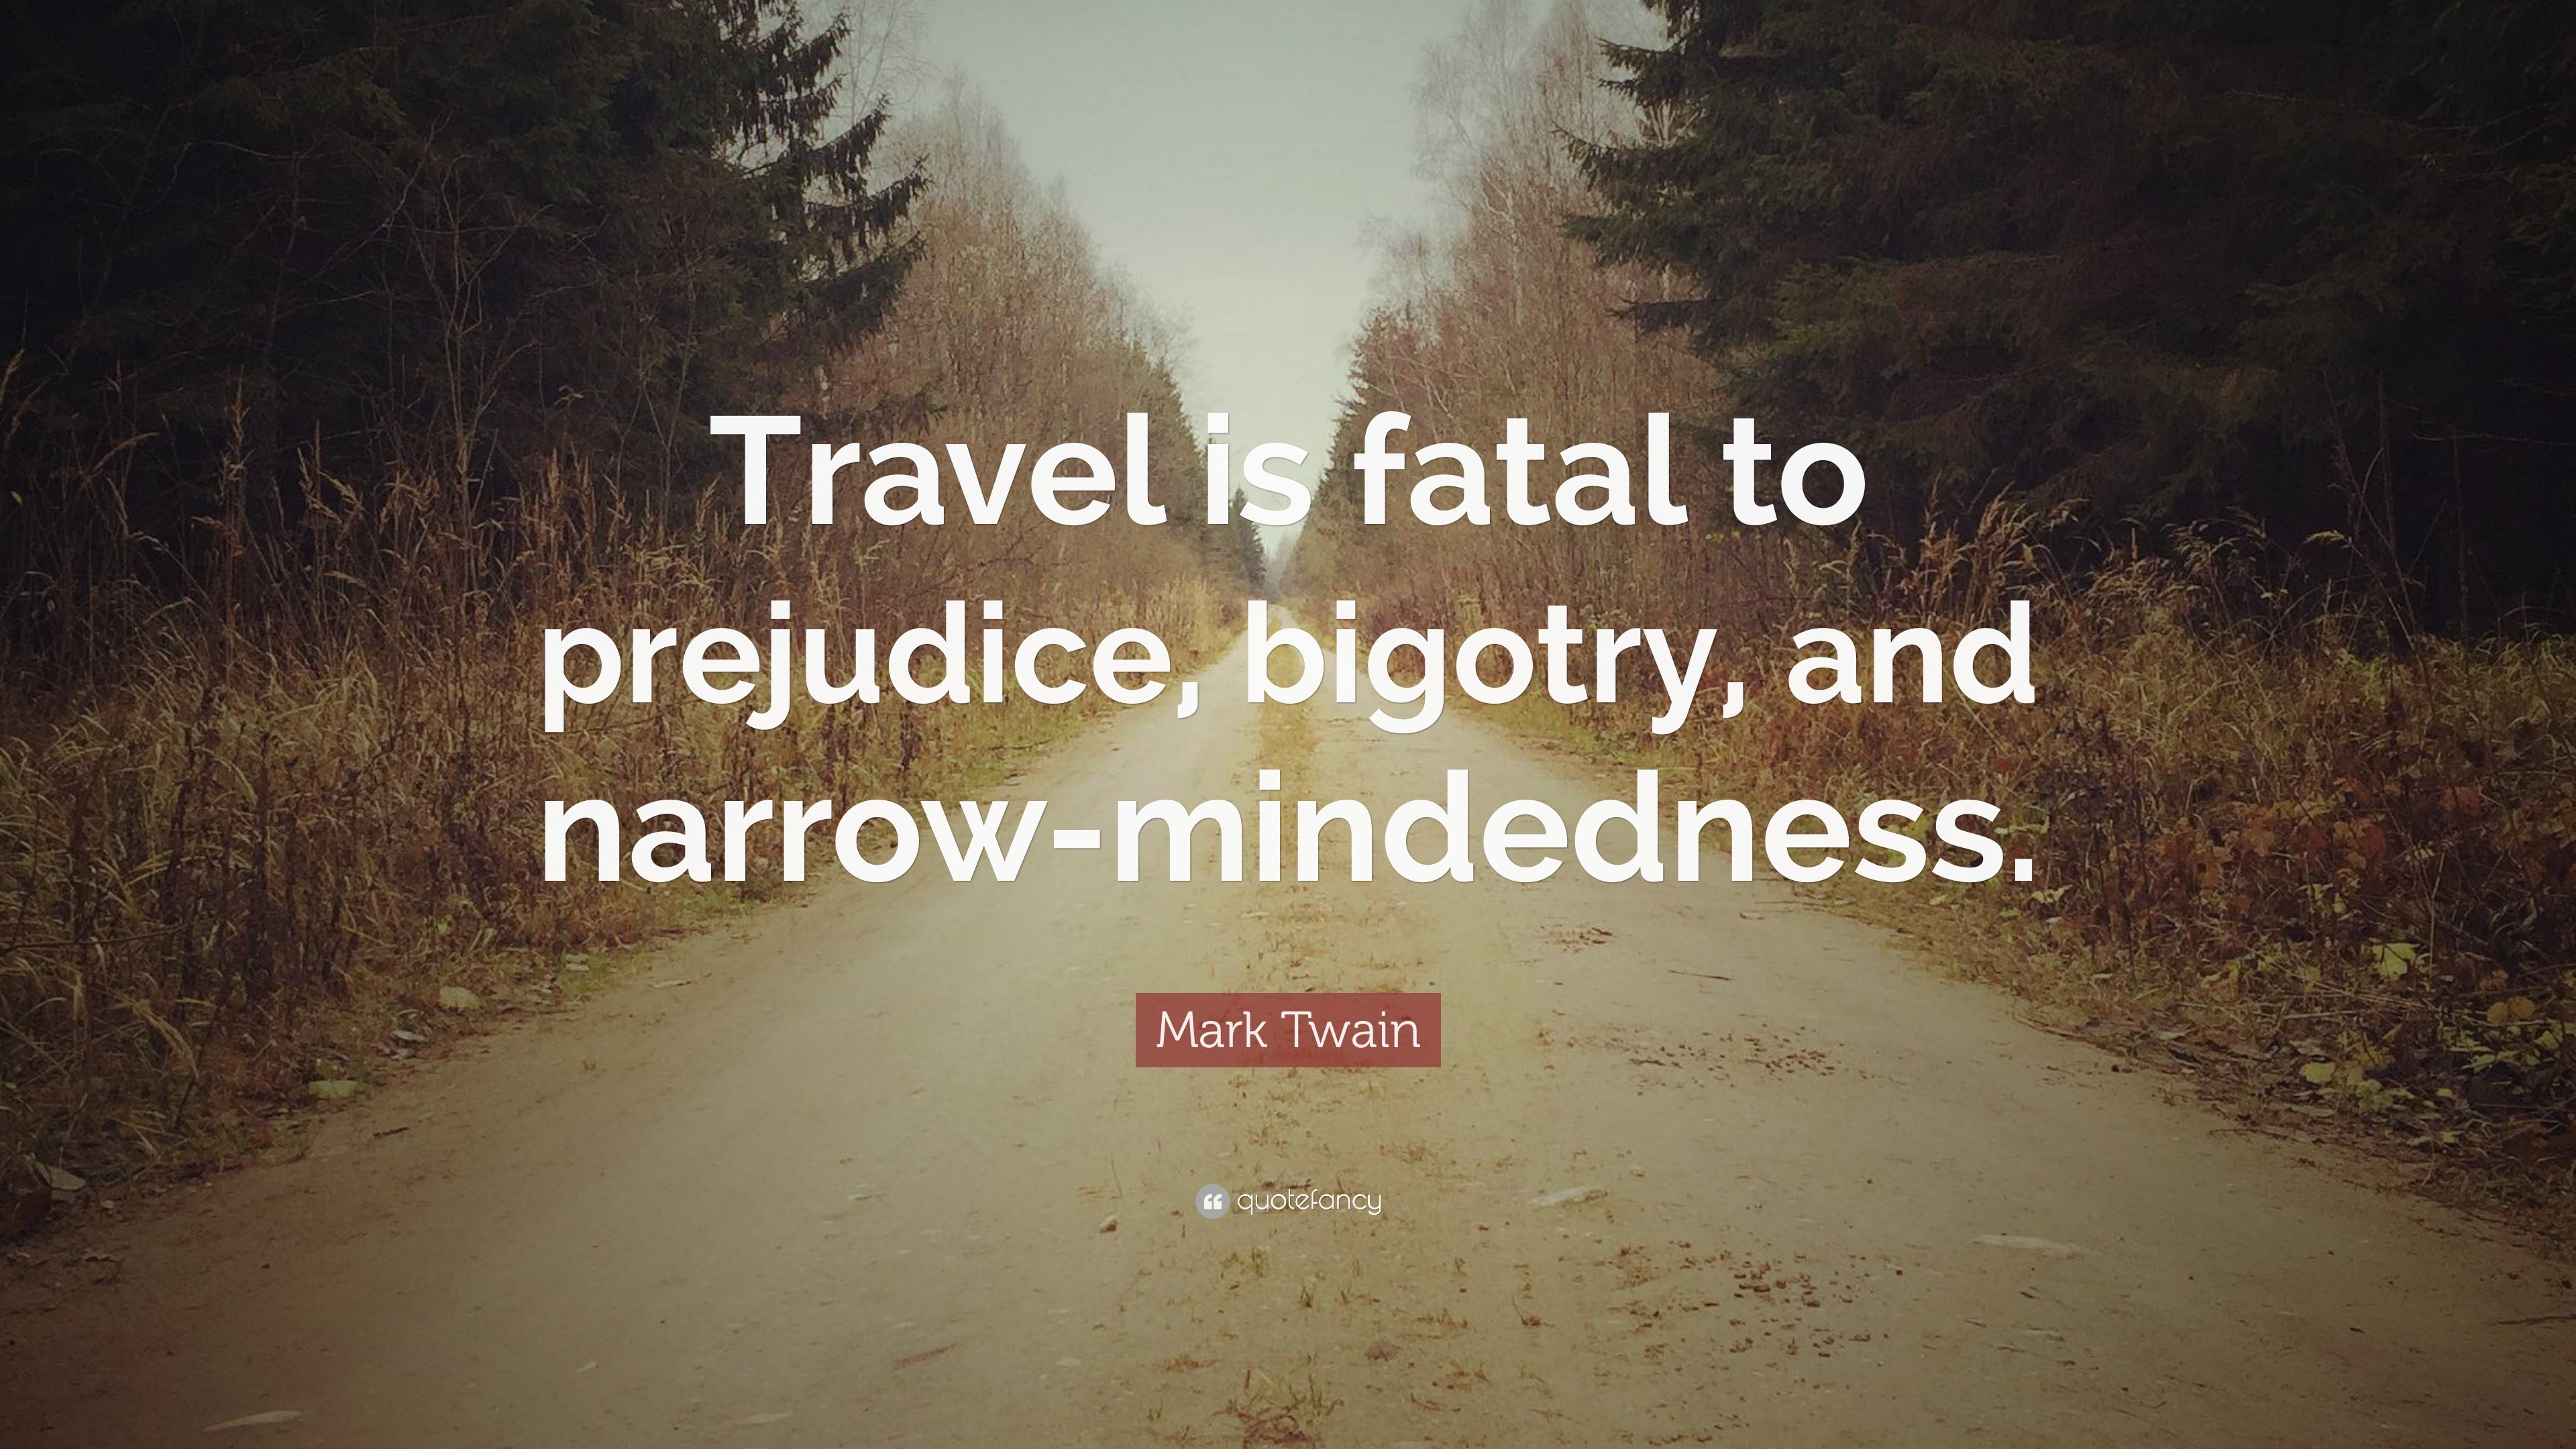 Mark Twain Quote: “Travel is fatal to prejudice, bigotry, and narrow